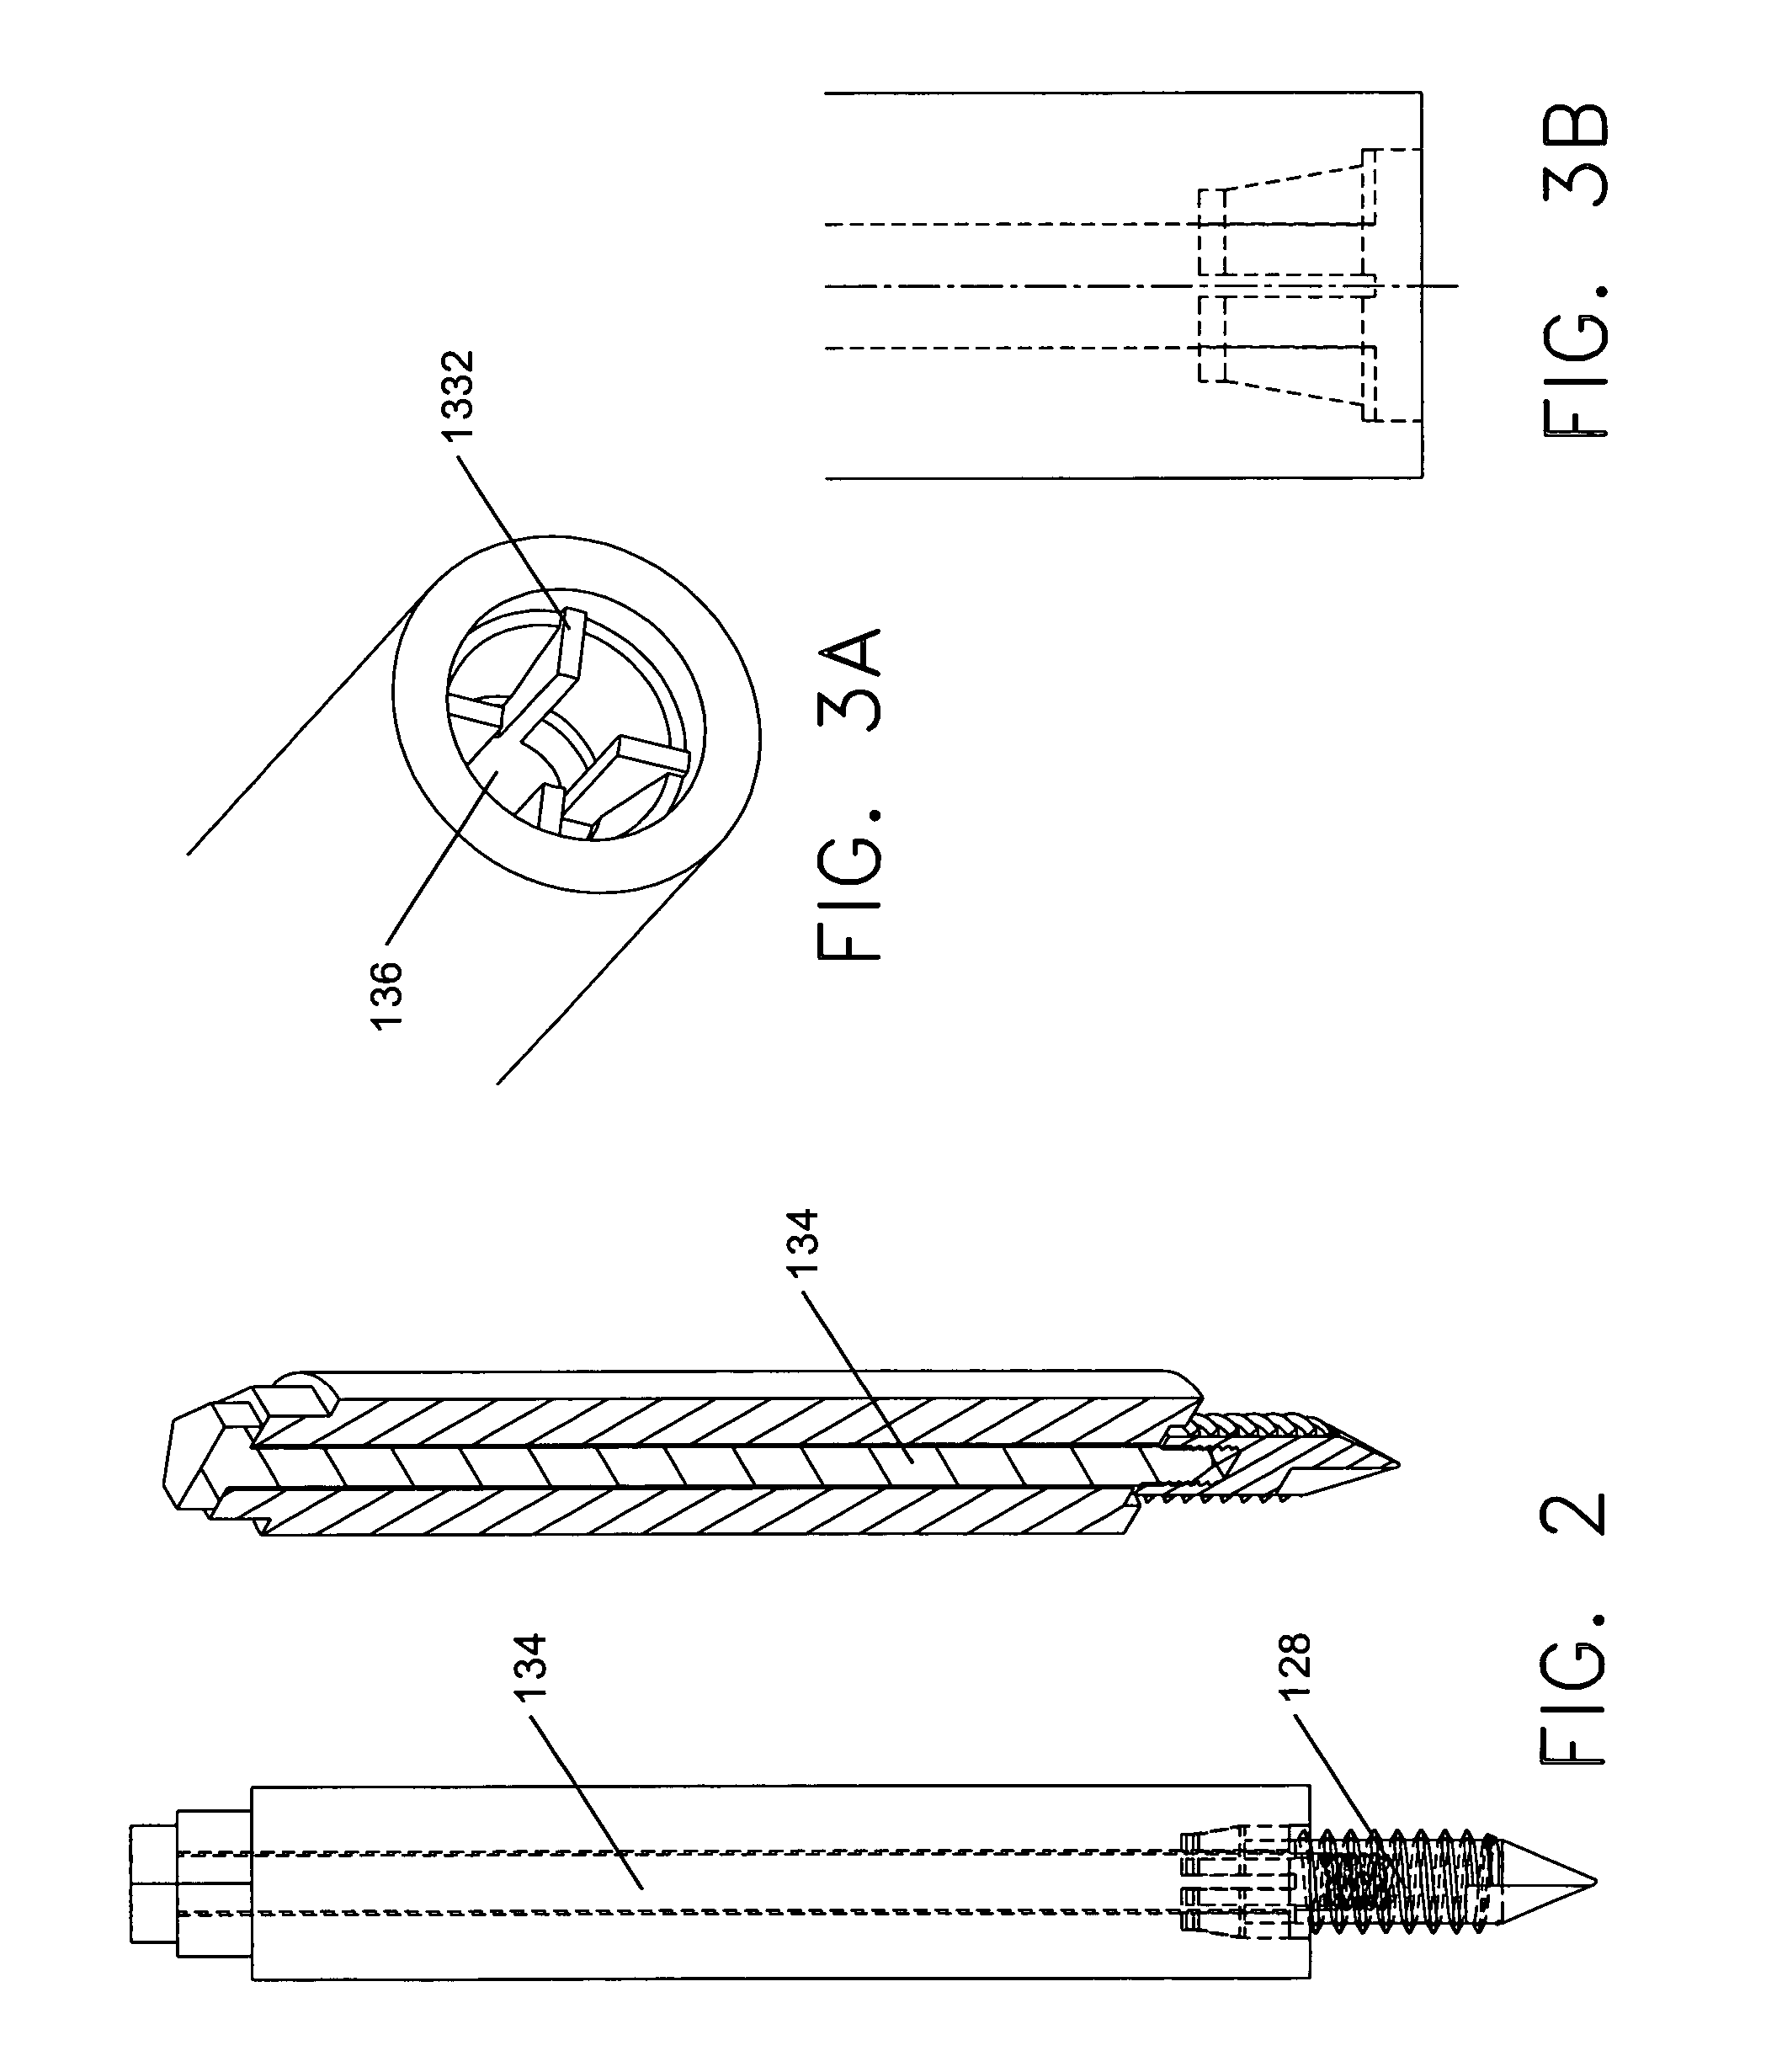 Plating system for bone fixation and subsidence and method of implantation